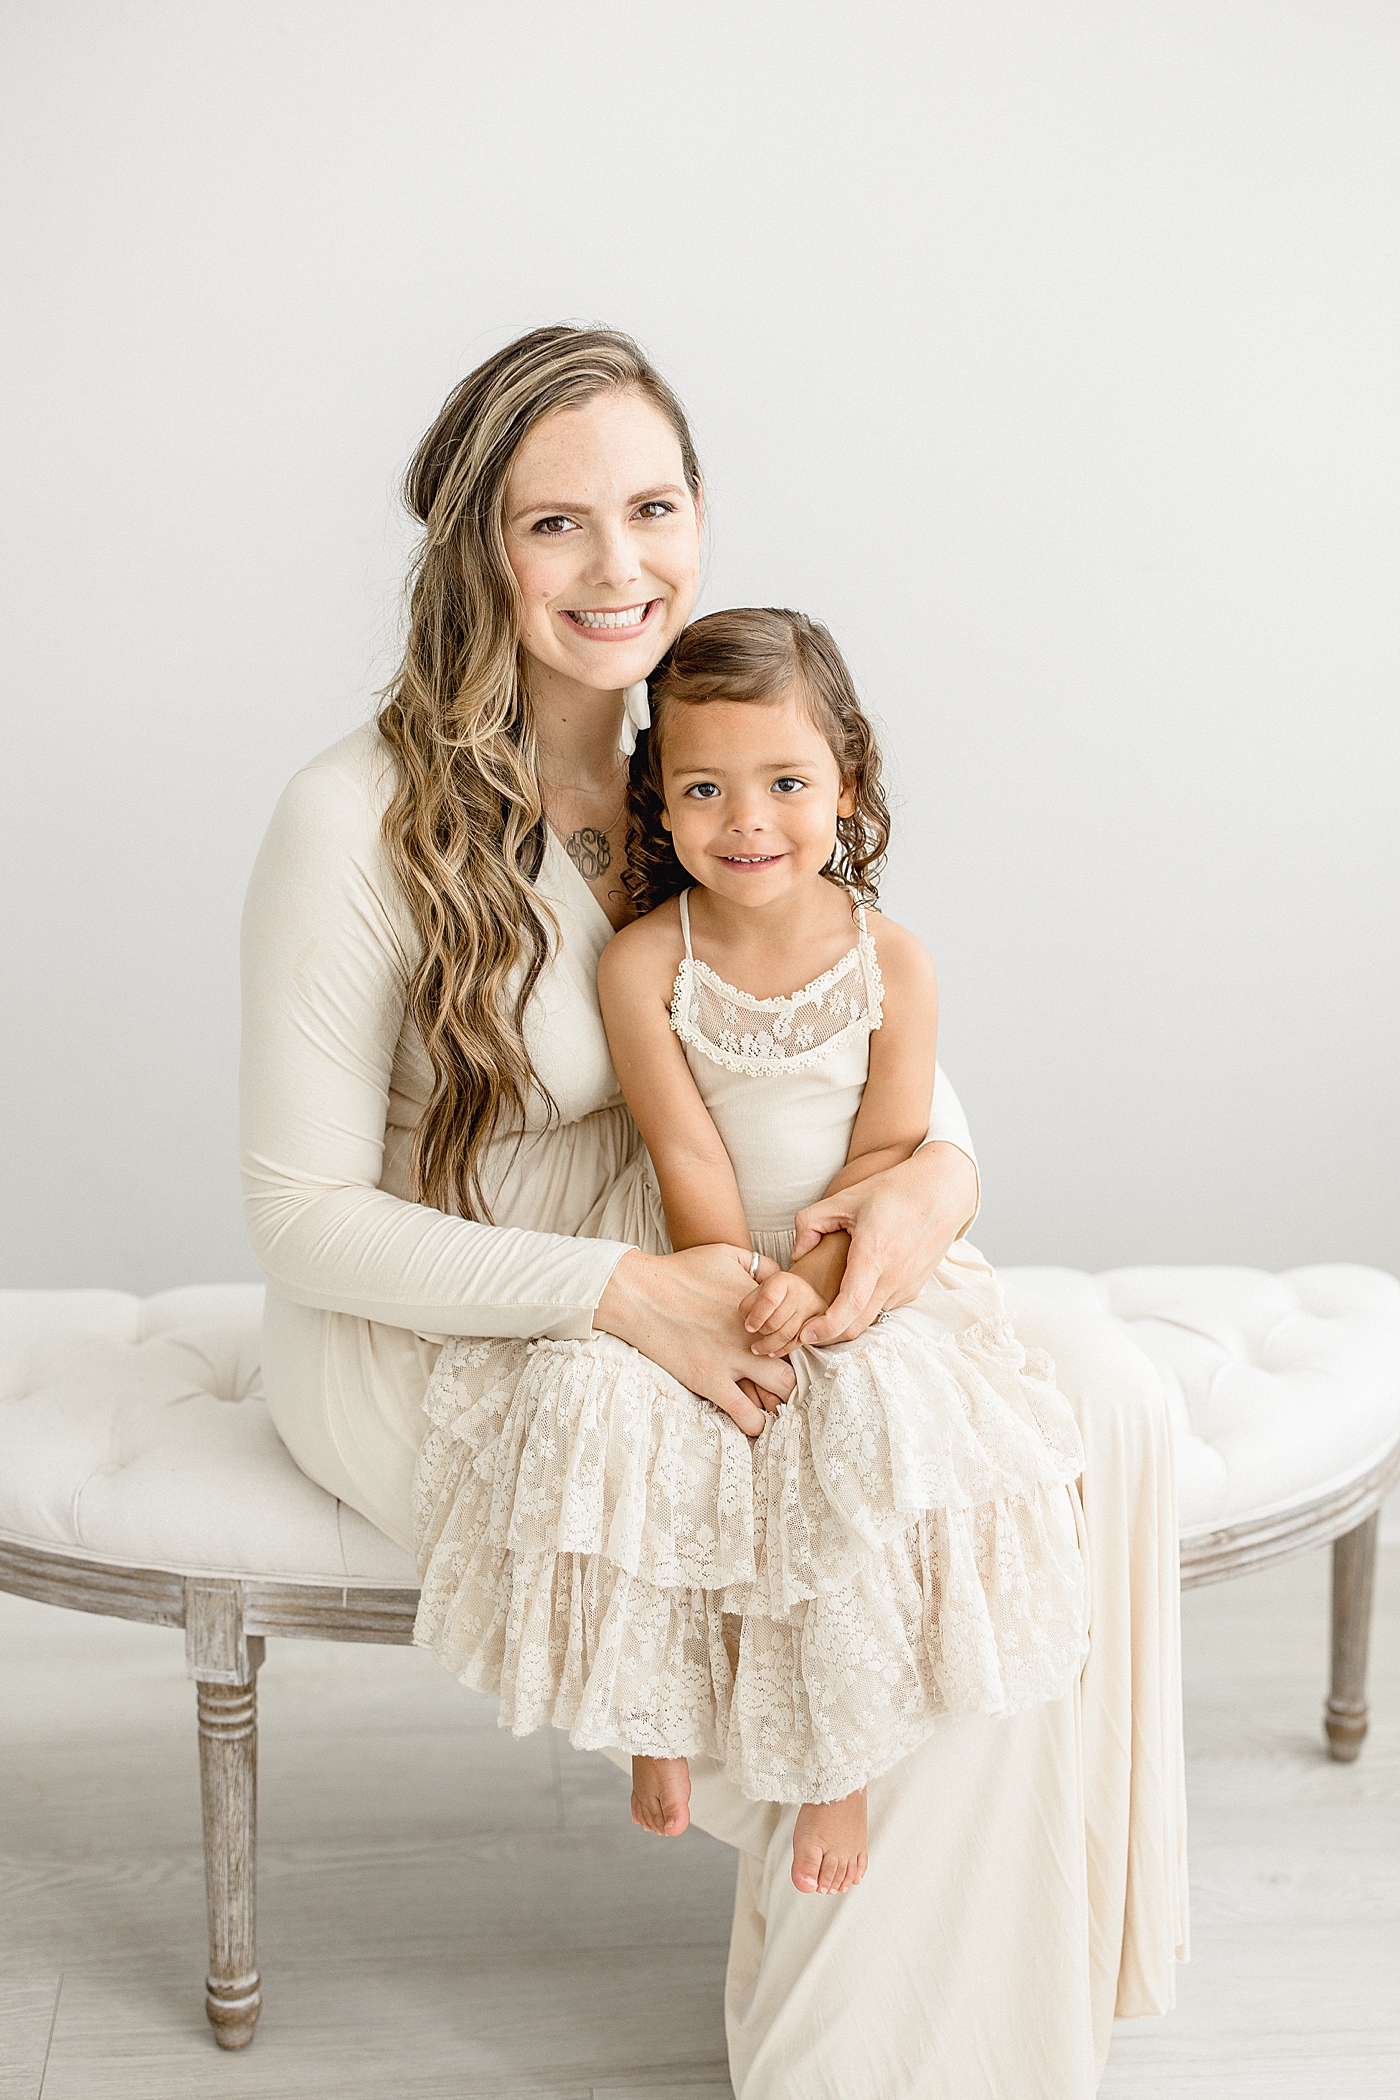 Mom and her oldest daughter sitting on a bench. Photo by Brittany Elise Photography.